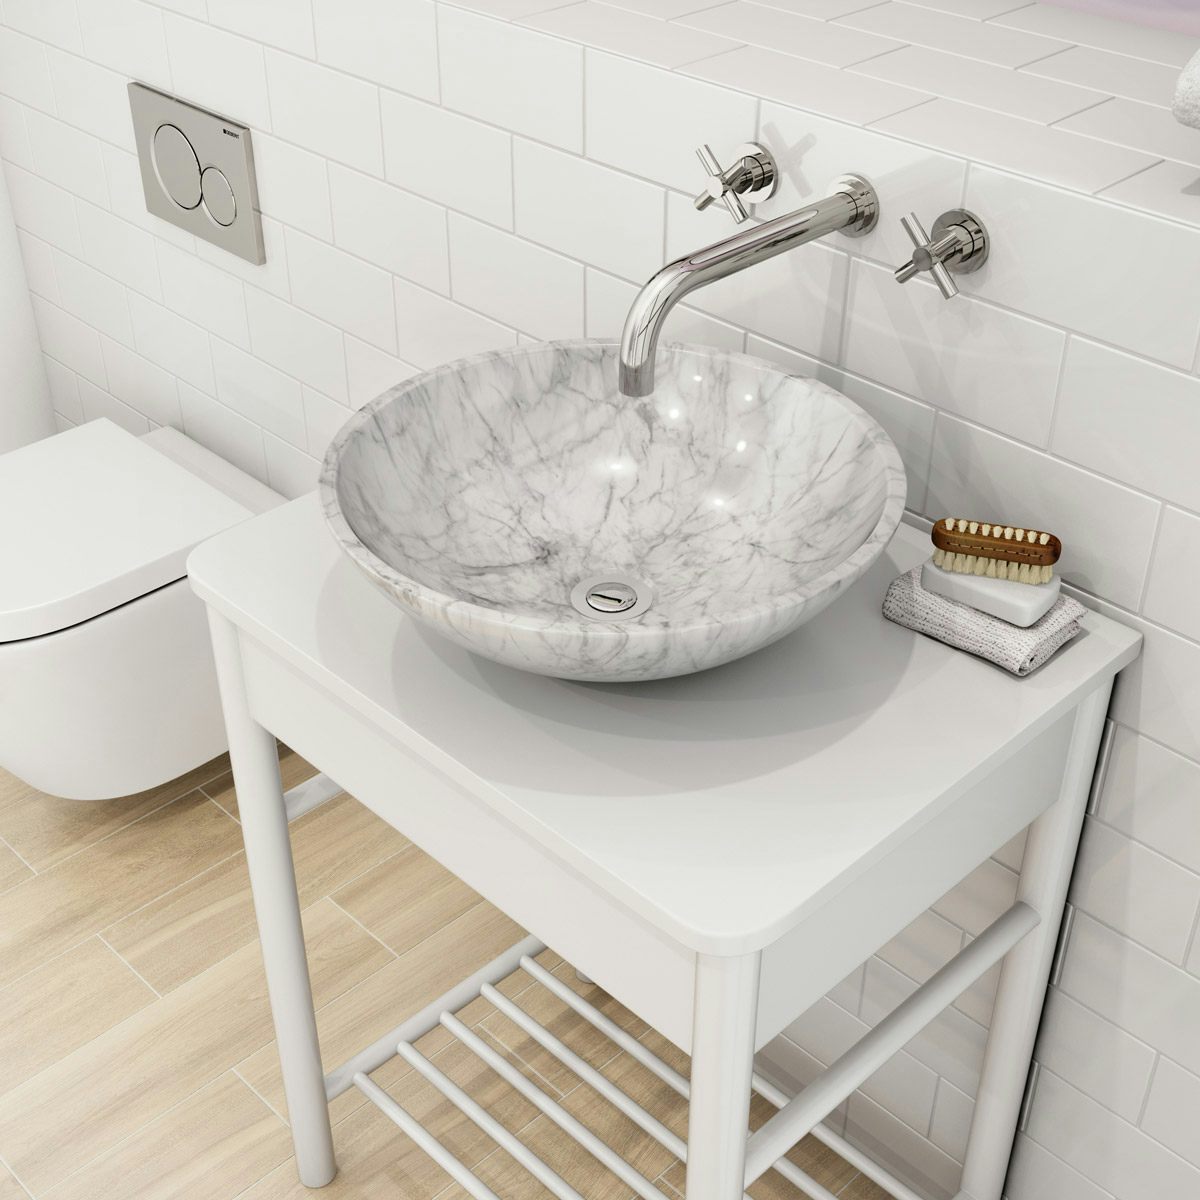 Mode Hale White And Grey Marble Countertop Basin 430mm